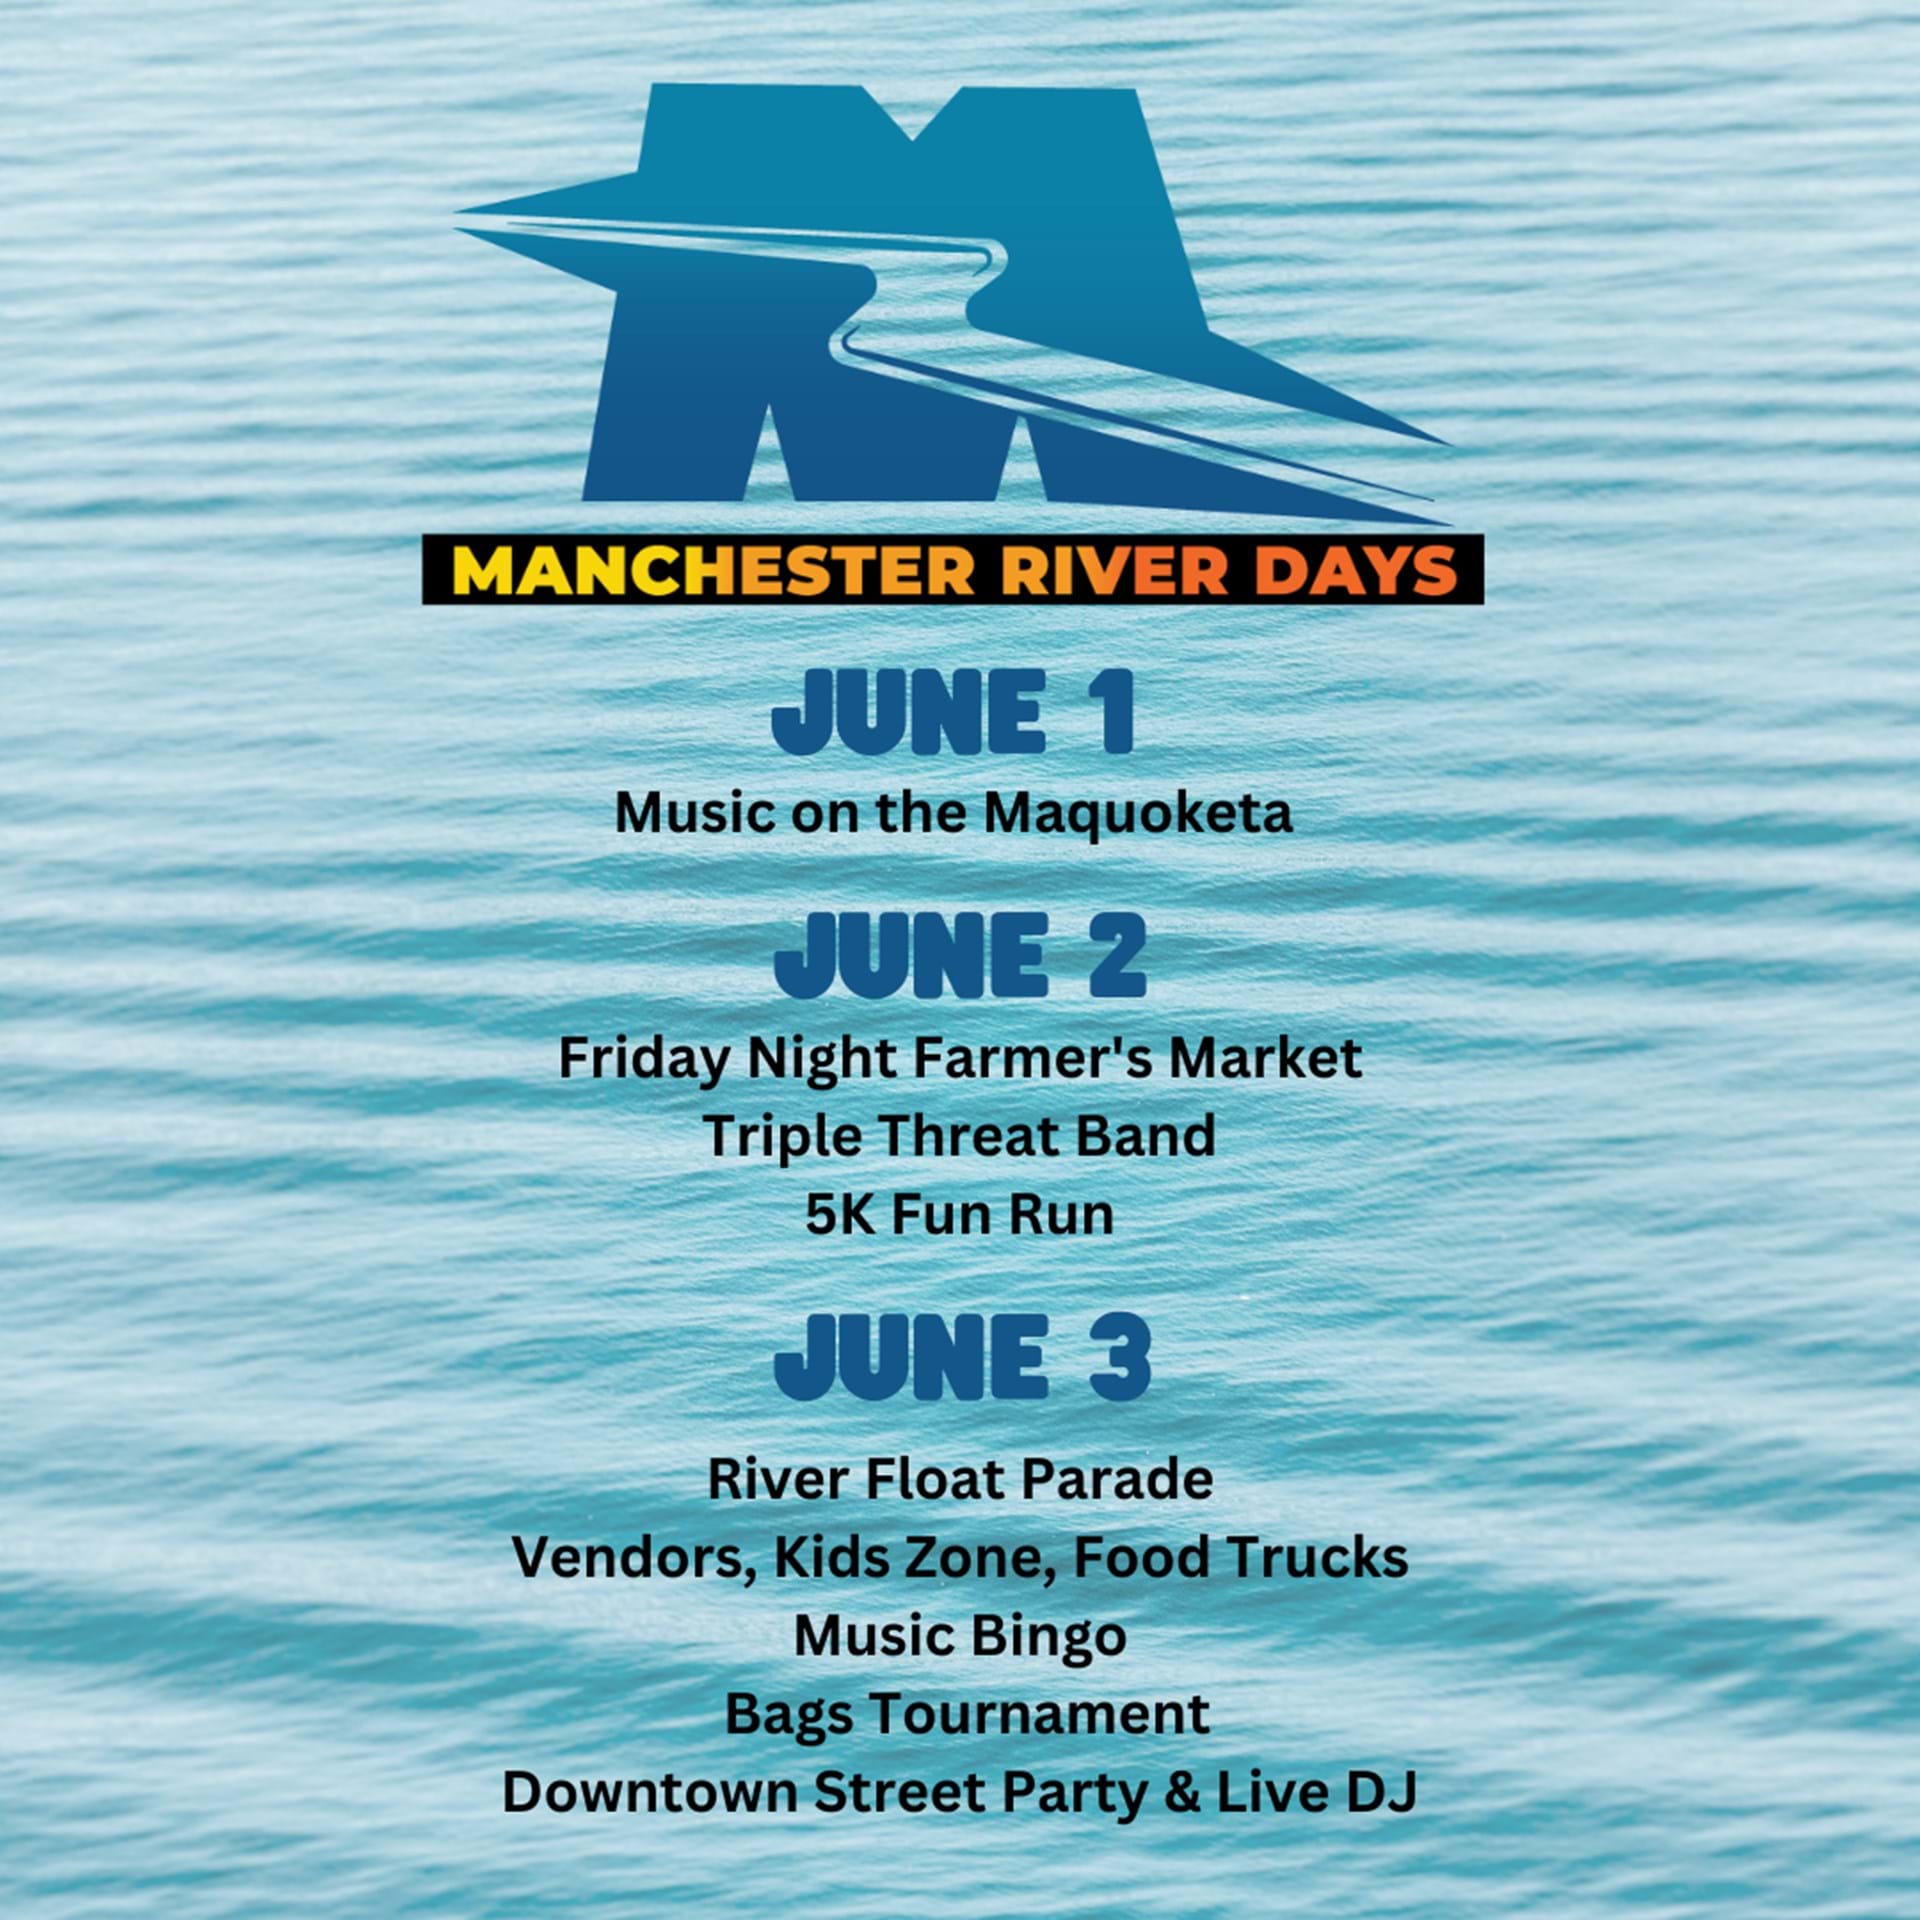 Events of Manchester River Days